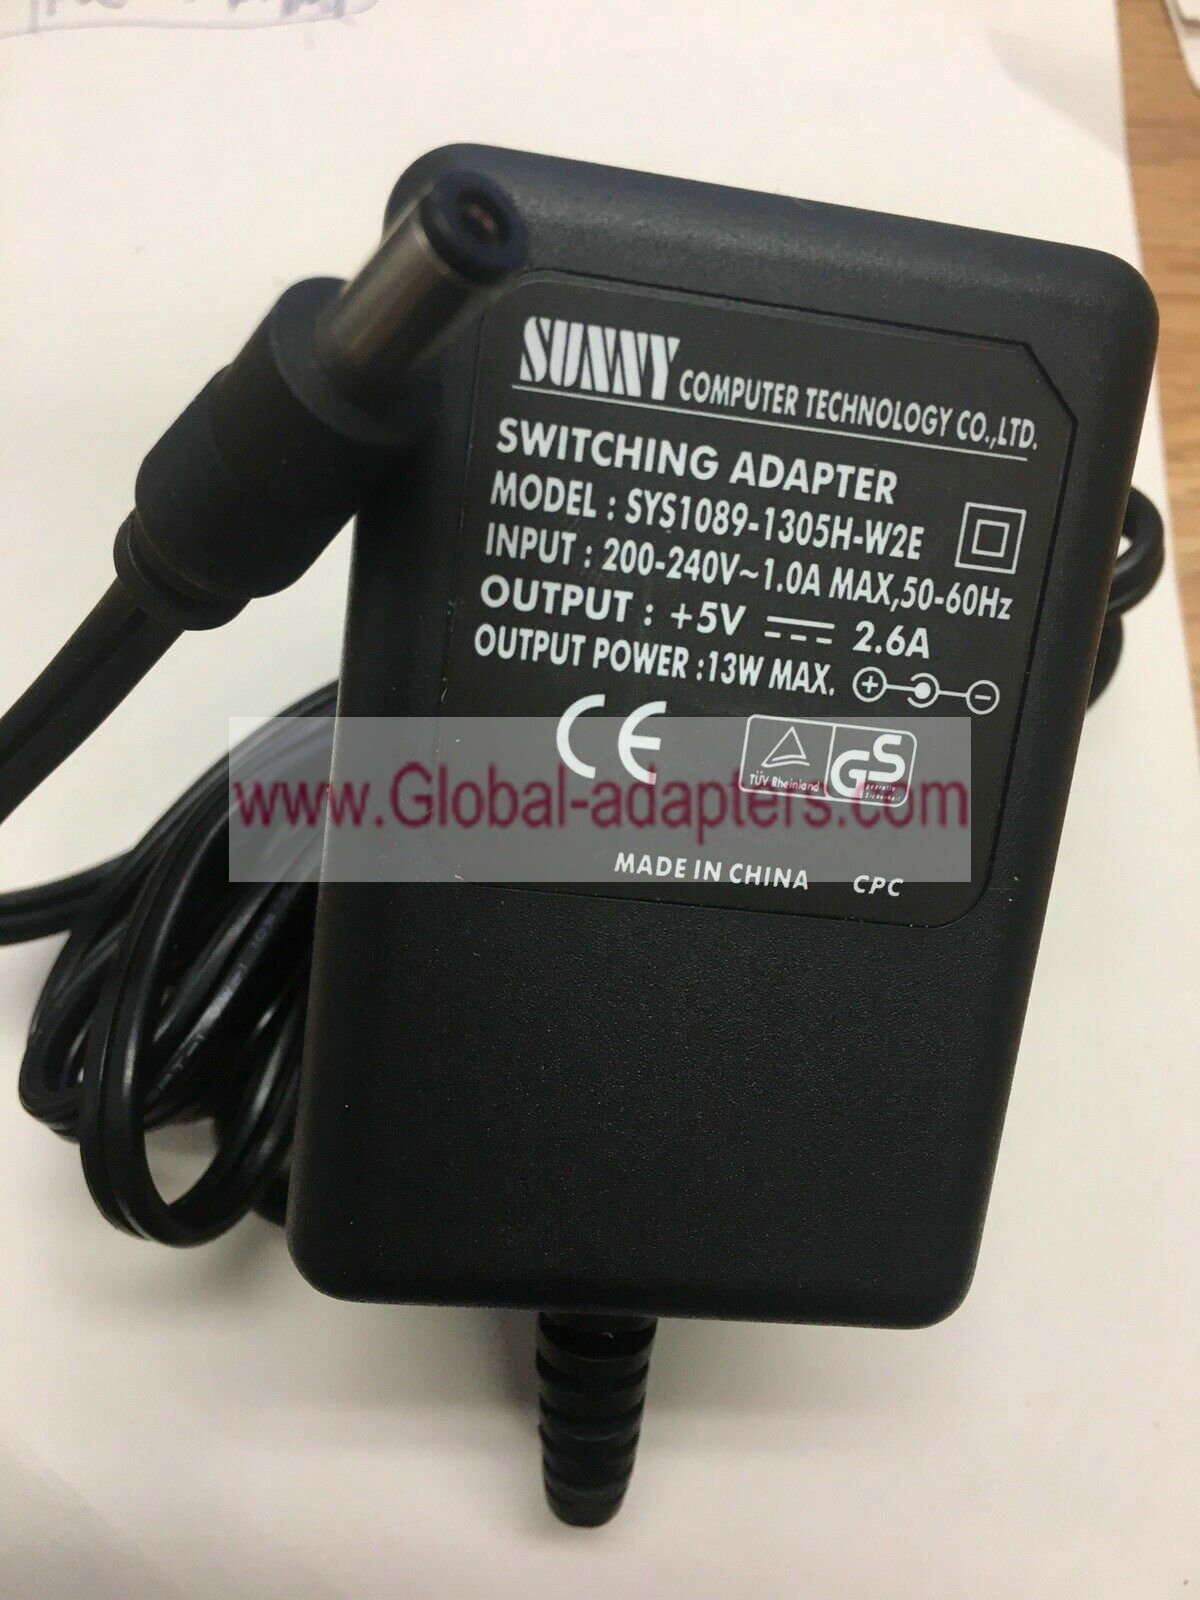 NEW Sunny SYS1089-1305H-W2E Switching Adapter 5V 2.6A Power Supply Transformer